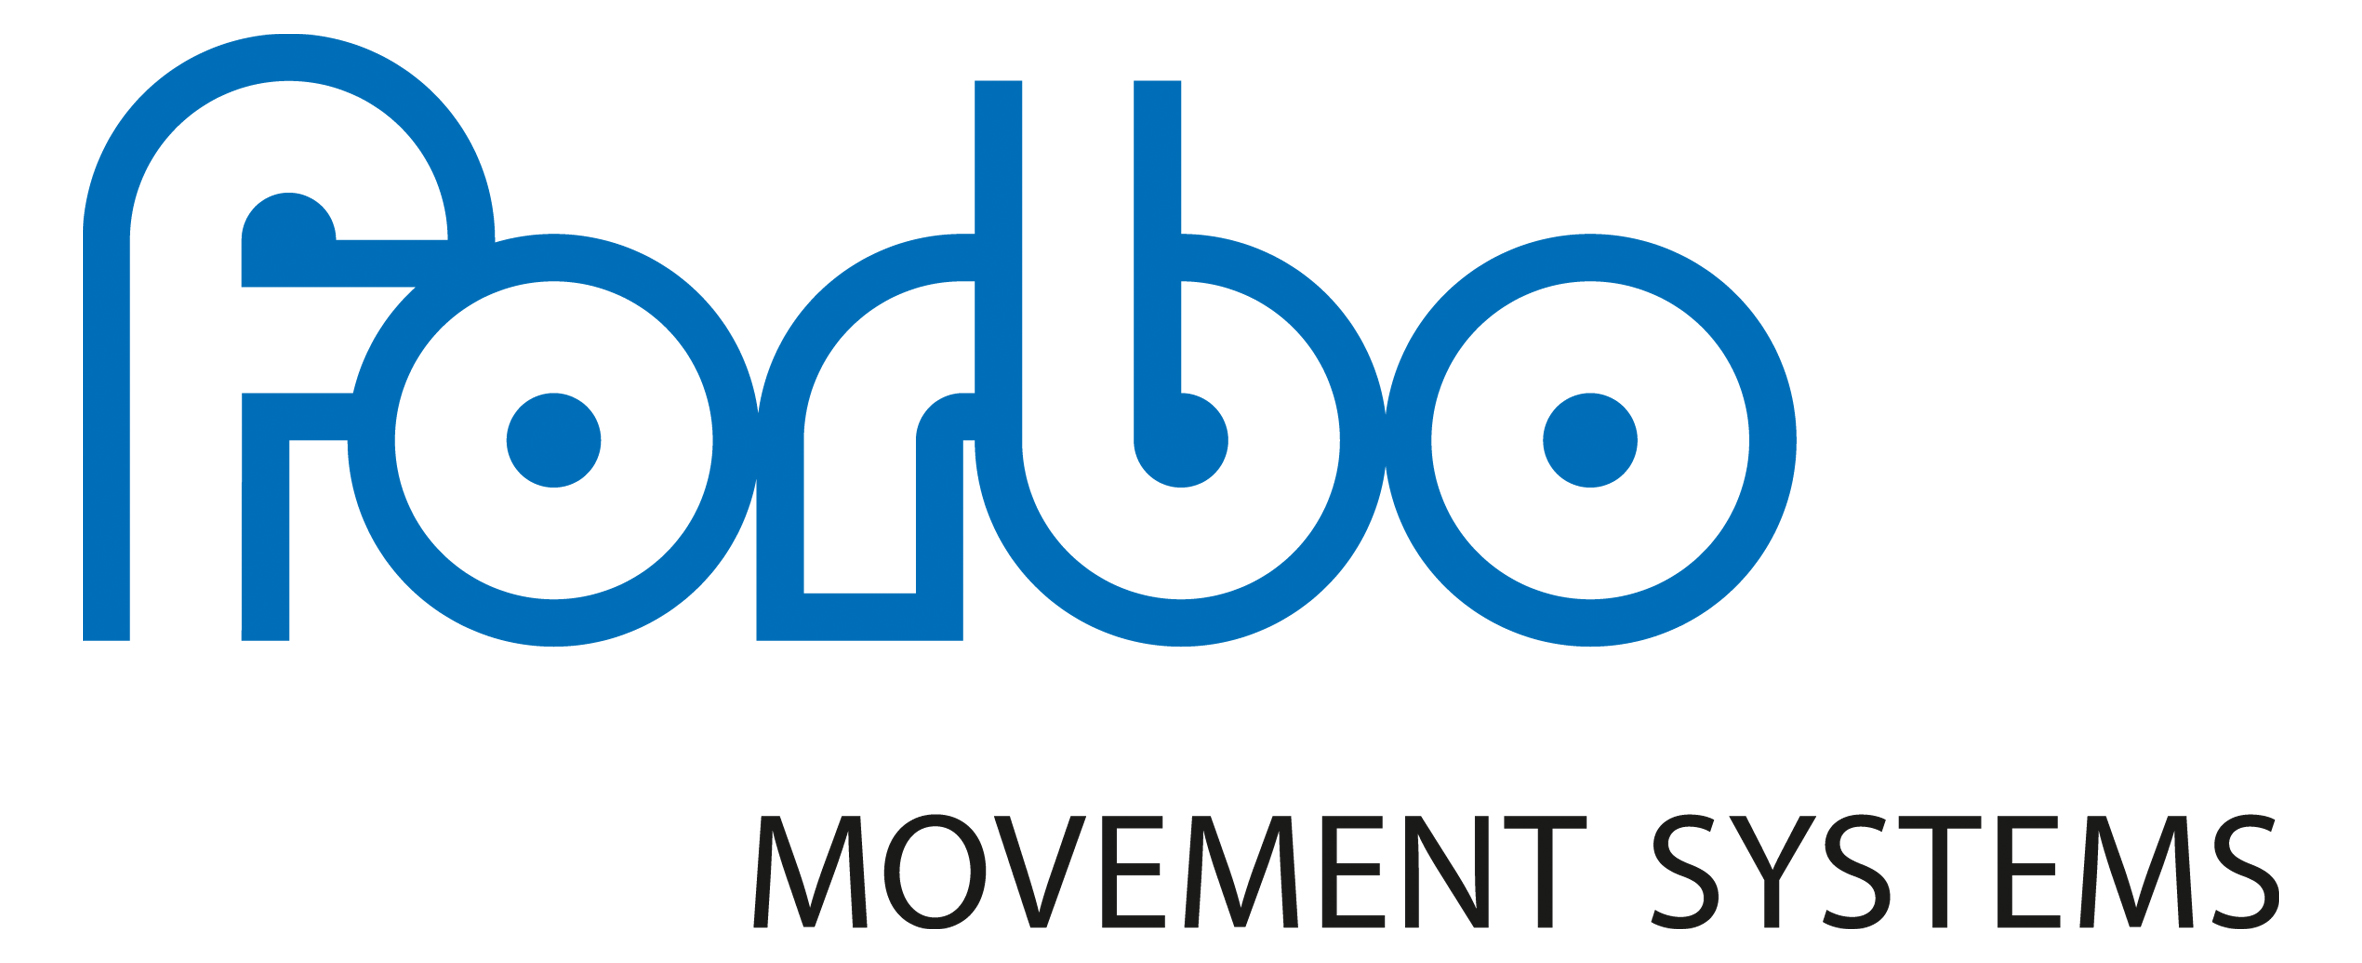 FORBO MOVEMENT SYSTEMS